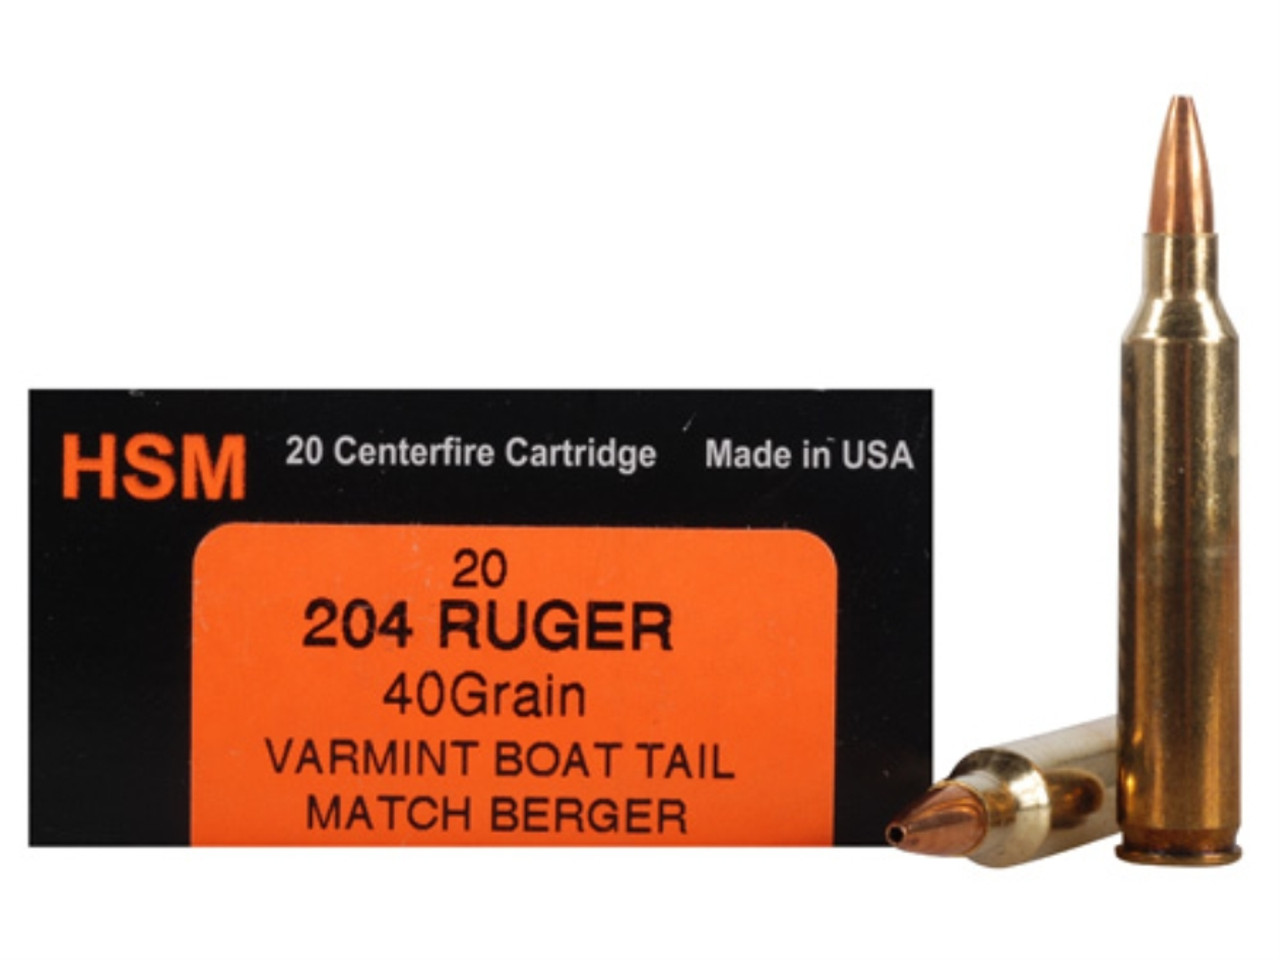 HSM teamed with Berger to create an exclusive line of rifle ammunition loaded with Berger Varmint hunting bullets which were previously only available to handloaders. These bullets are engineered to fragments upon impact.  With this fragmentation the end result is massive wound channel. Because the vast majority of the bullet's energy is expended inside the target animal, quick and humane kills are ensured. These rounds are made with Winchester brass, match-grade primers and technologically advanced powders that are not affected by temperatures and altitude. Premium components result in consistent performance and match-grade accuracy

Caliber:  204 Ruger
Bullet Style: 40 Grain, Boat Base
Case Type: New Brass
Muzzle Velocity: 3581mv-fps
Muzzle Energy: 1139me
Quantity:  20/Box